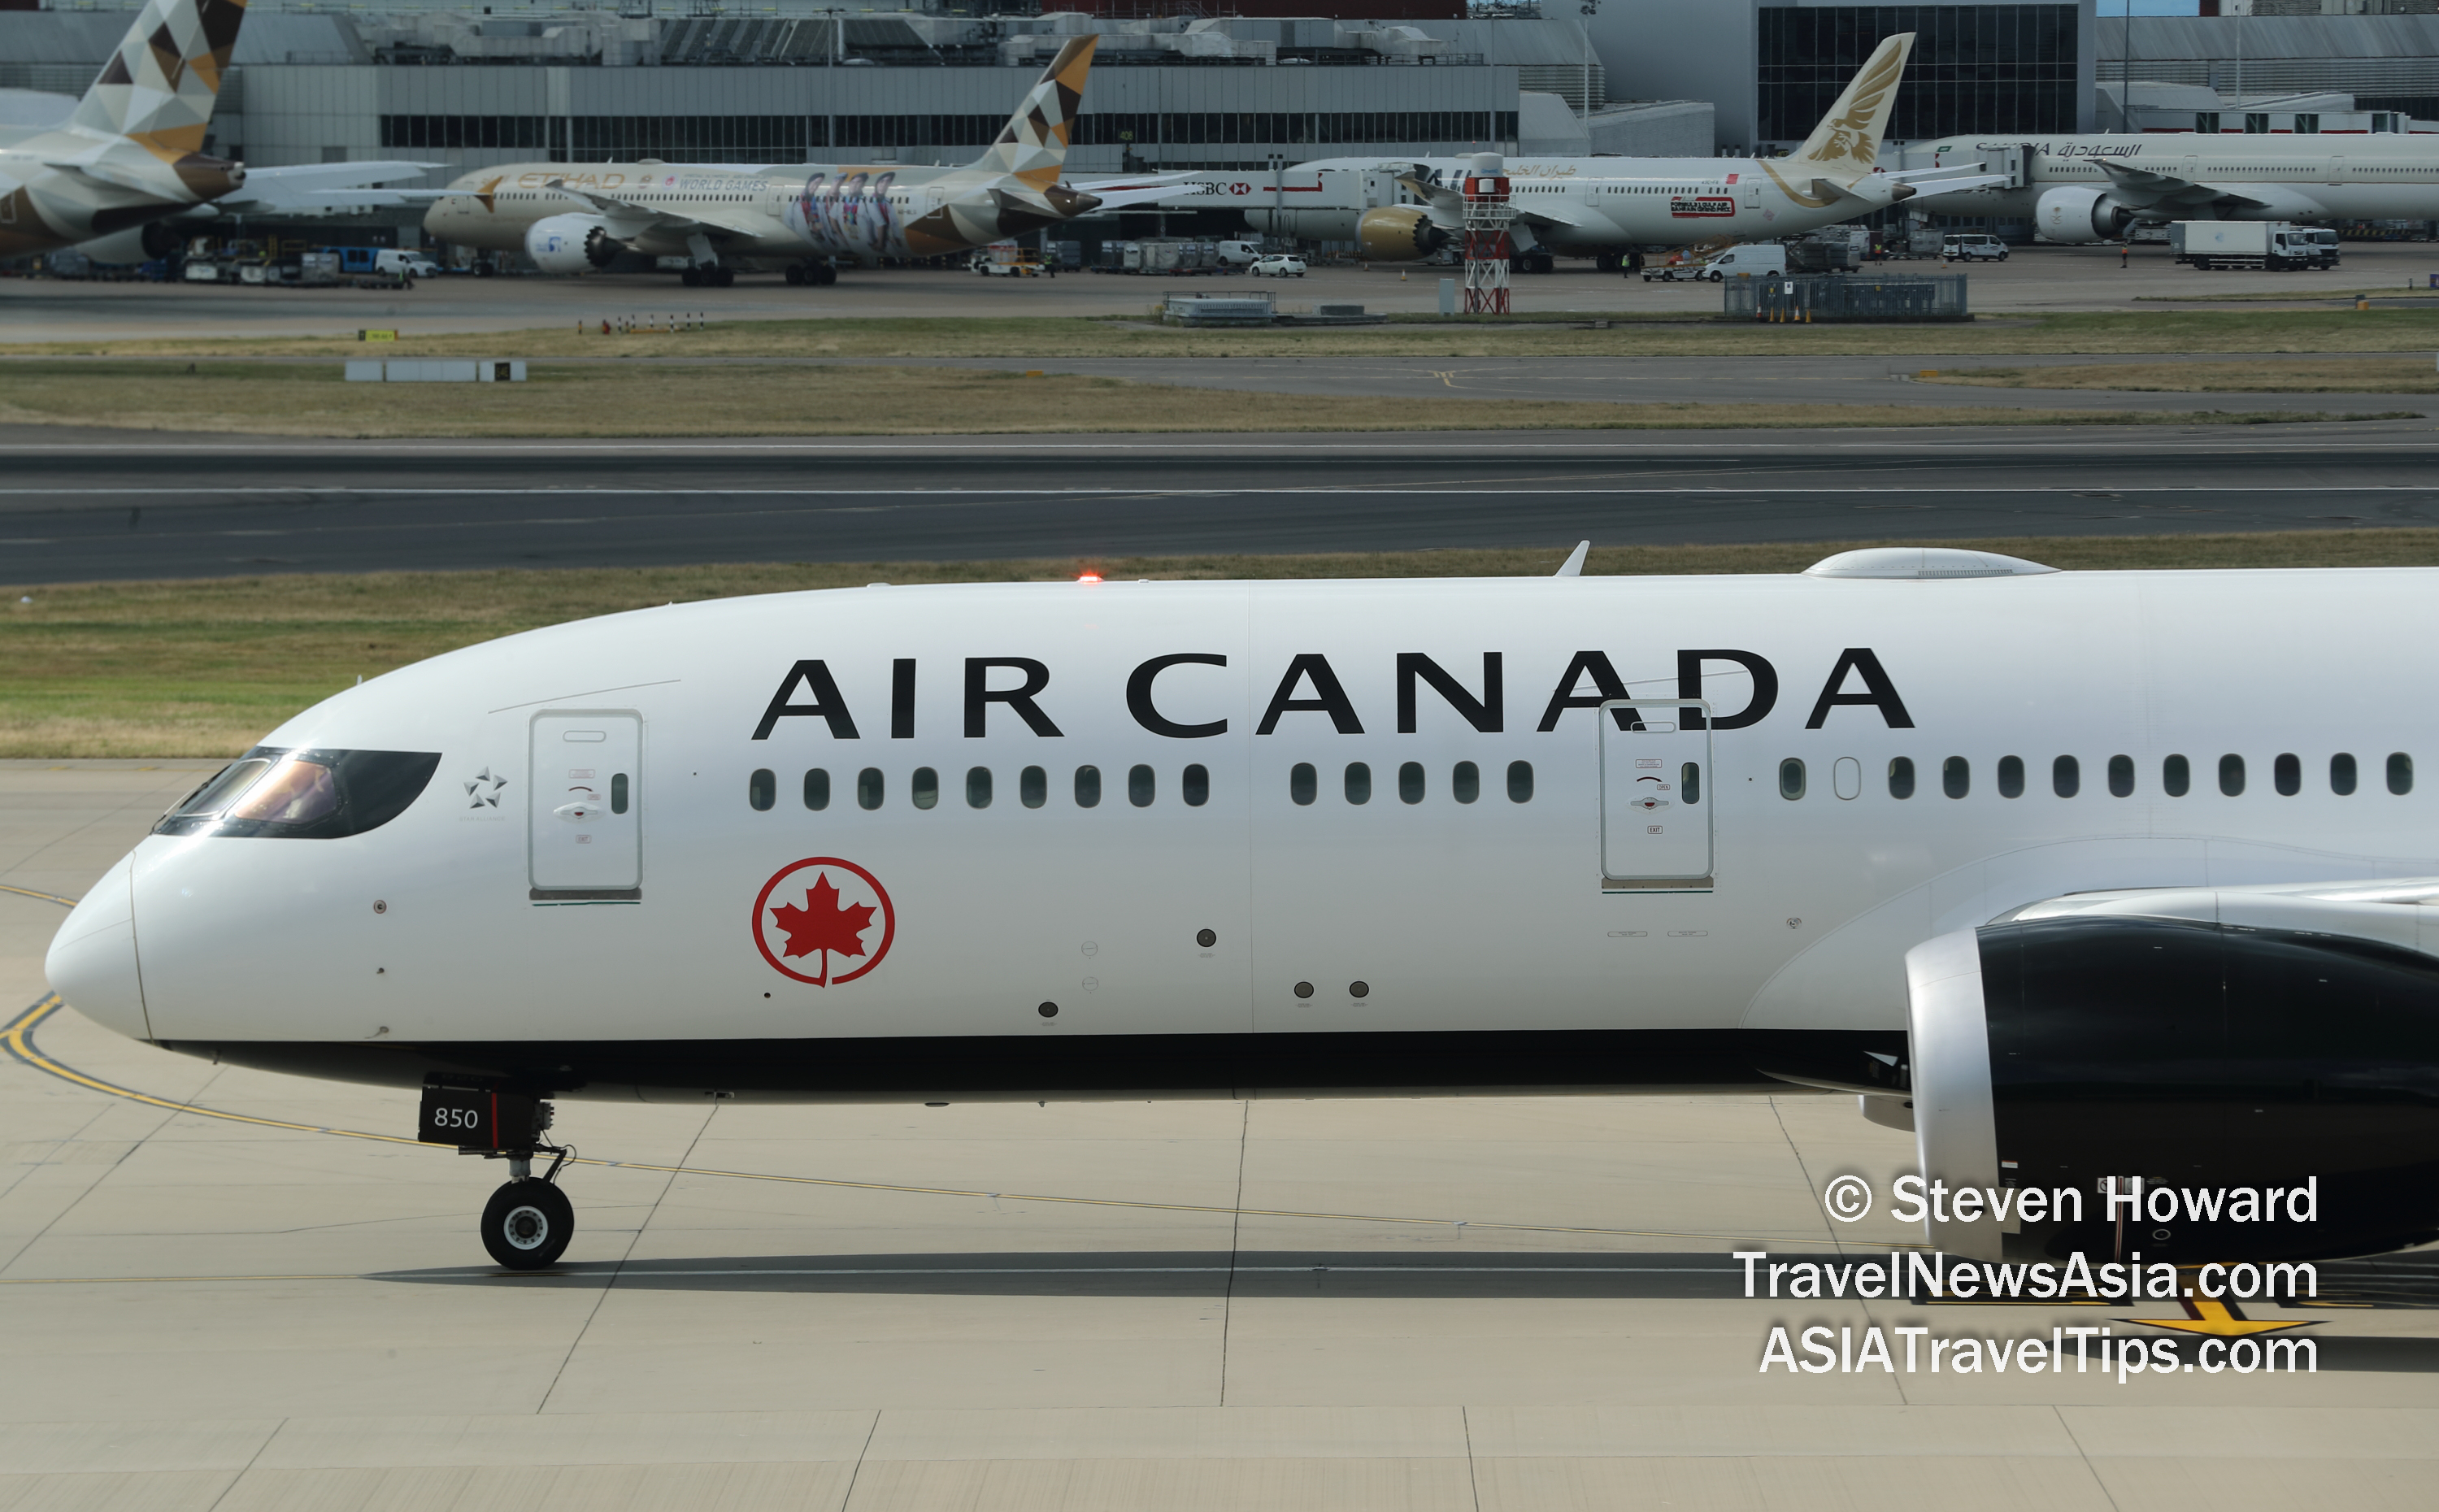 Air Canada Boeing 787-8 reg: C-FRTU at London Heathrow. Picture by Steven Howard of TravelNewsAsia.com Click to enlarge.